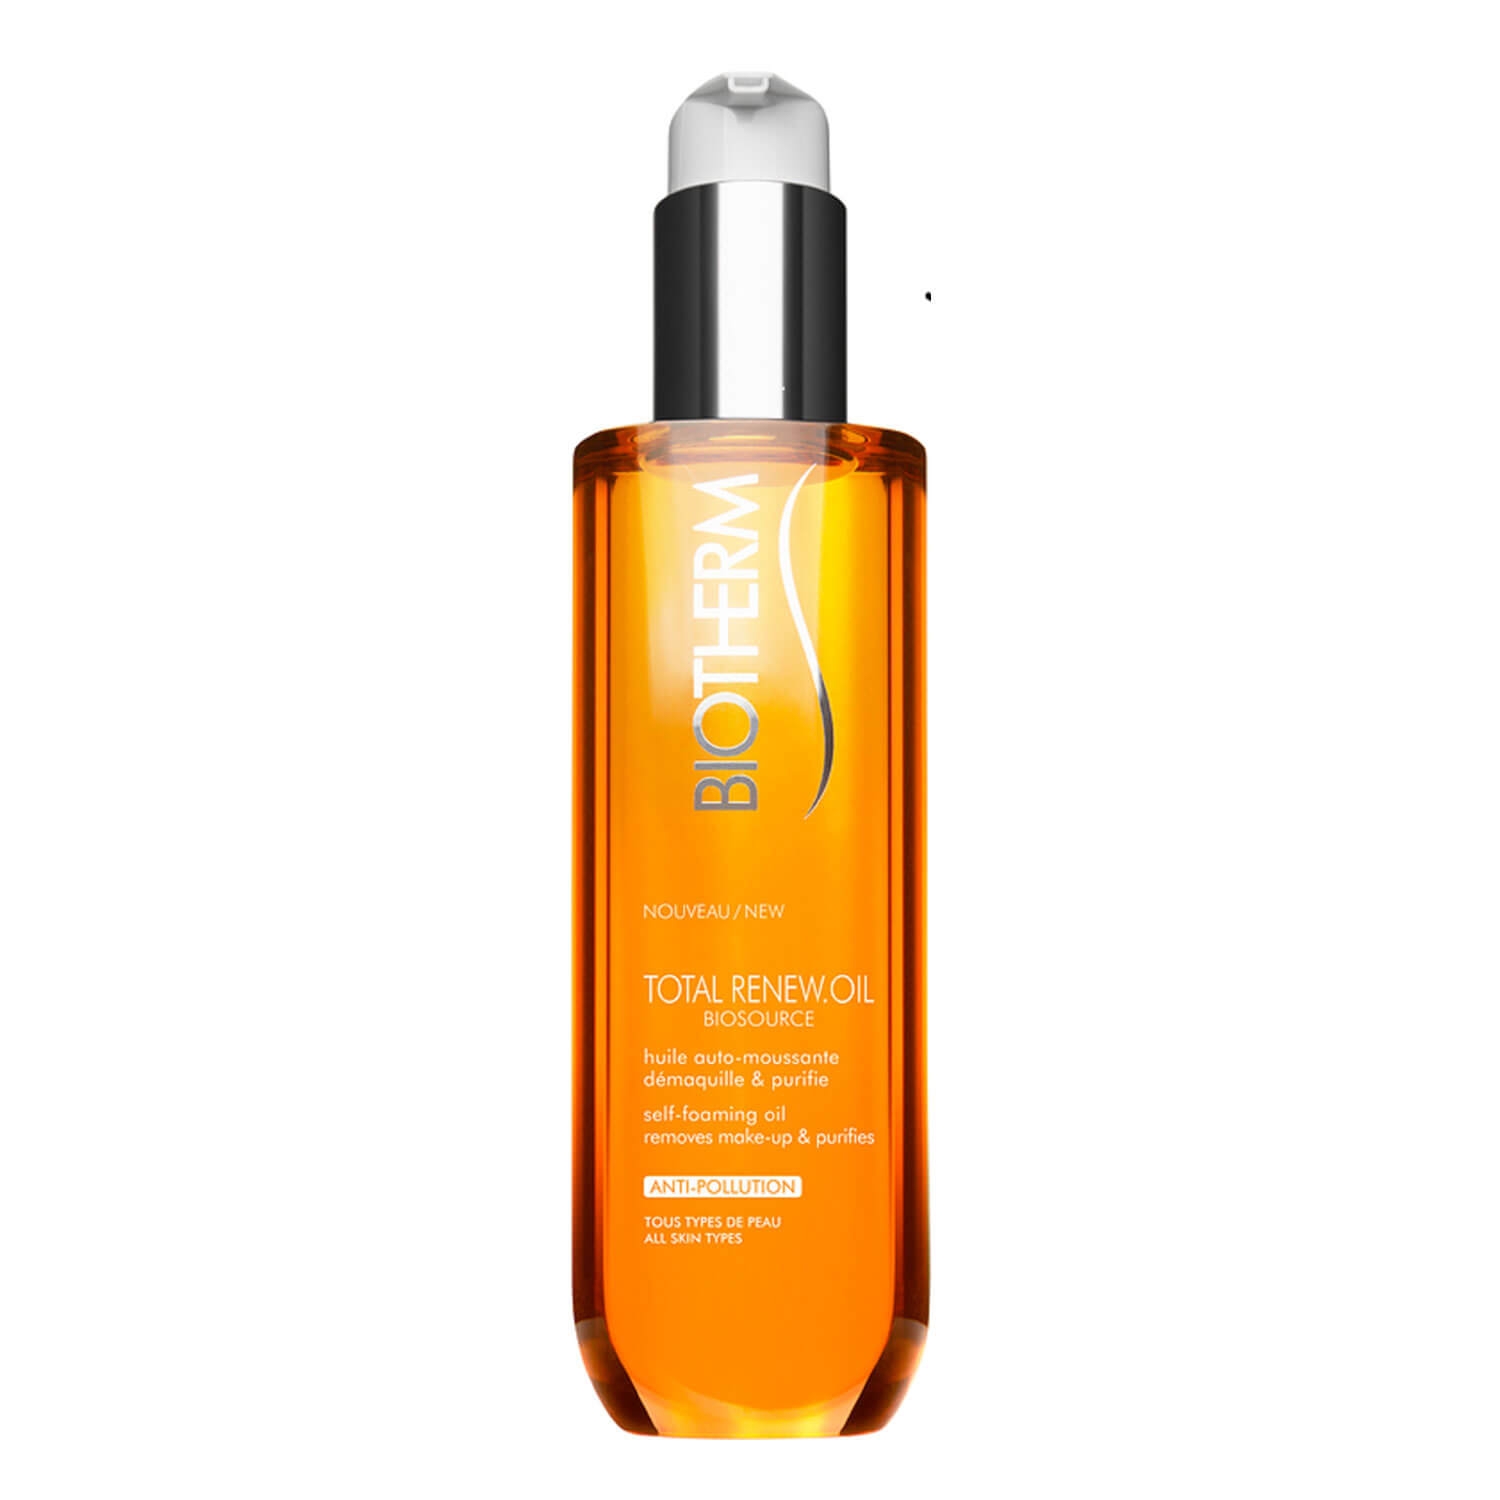 Product image from Biosource - Total Renew.Oil